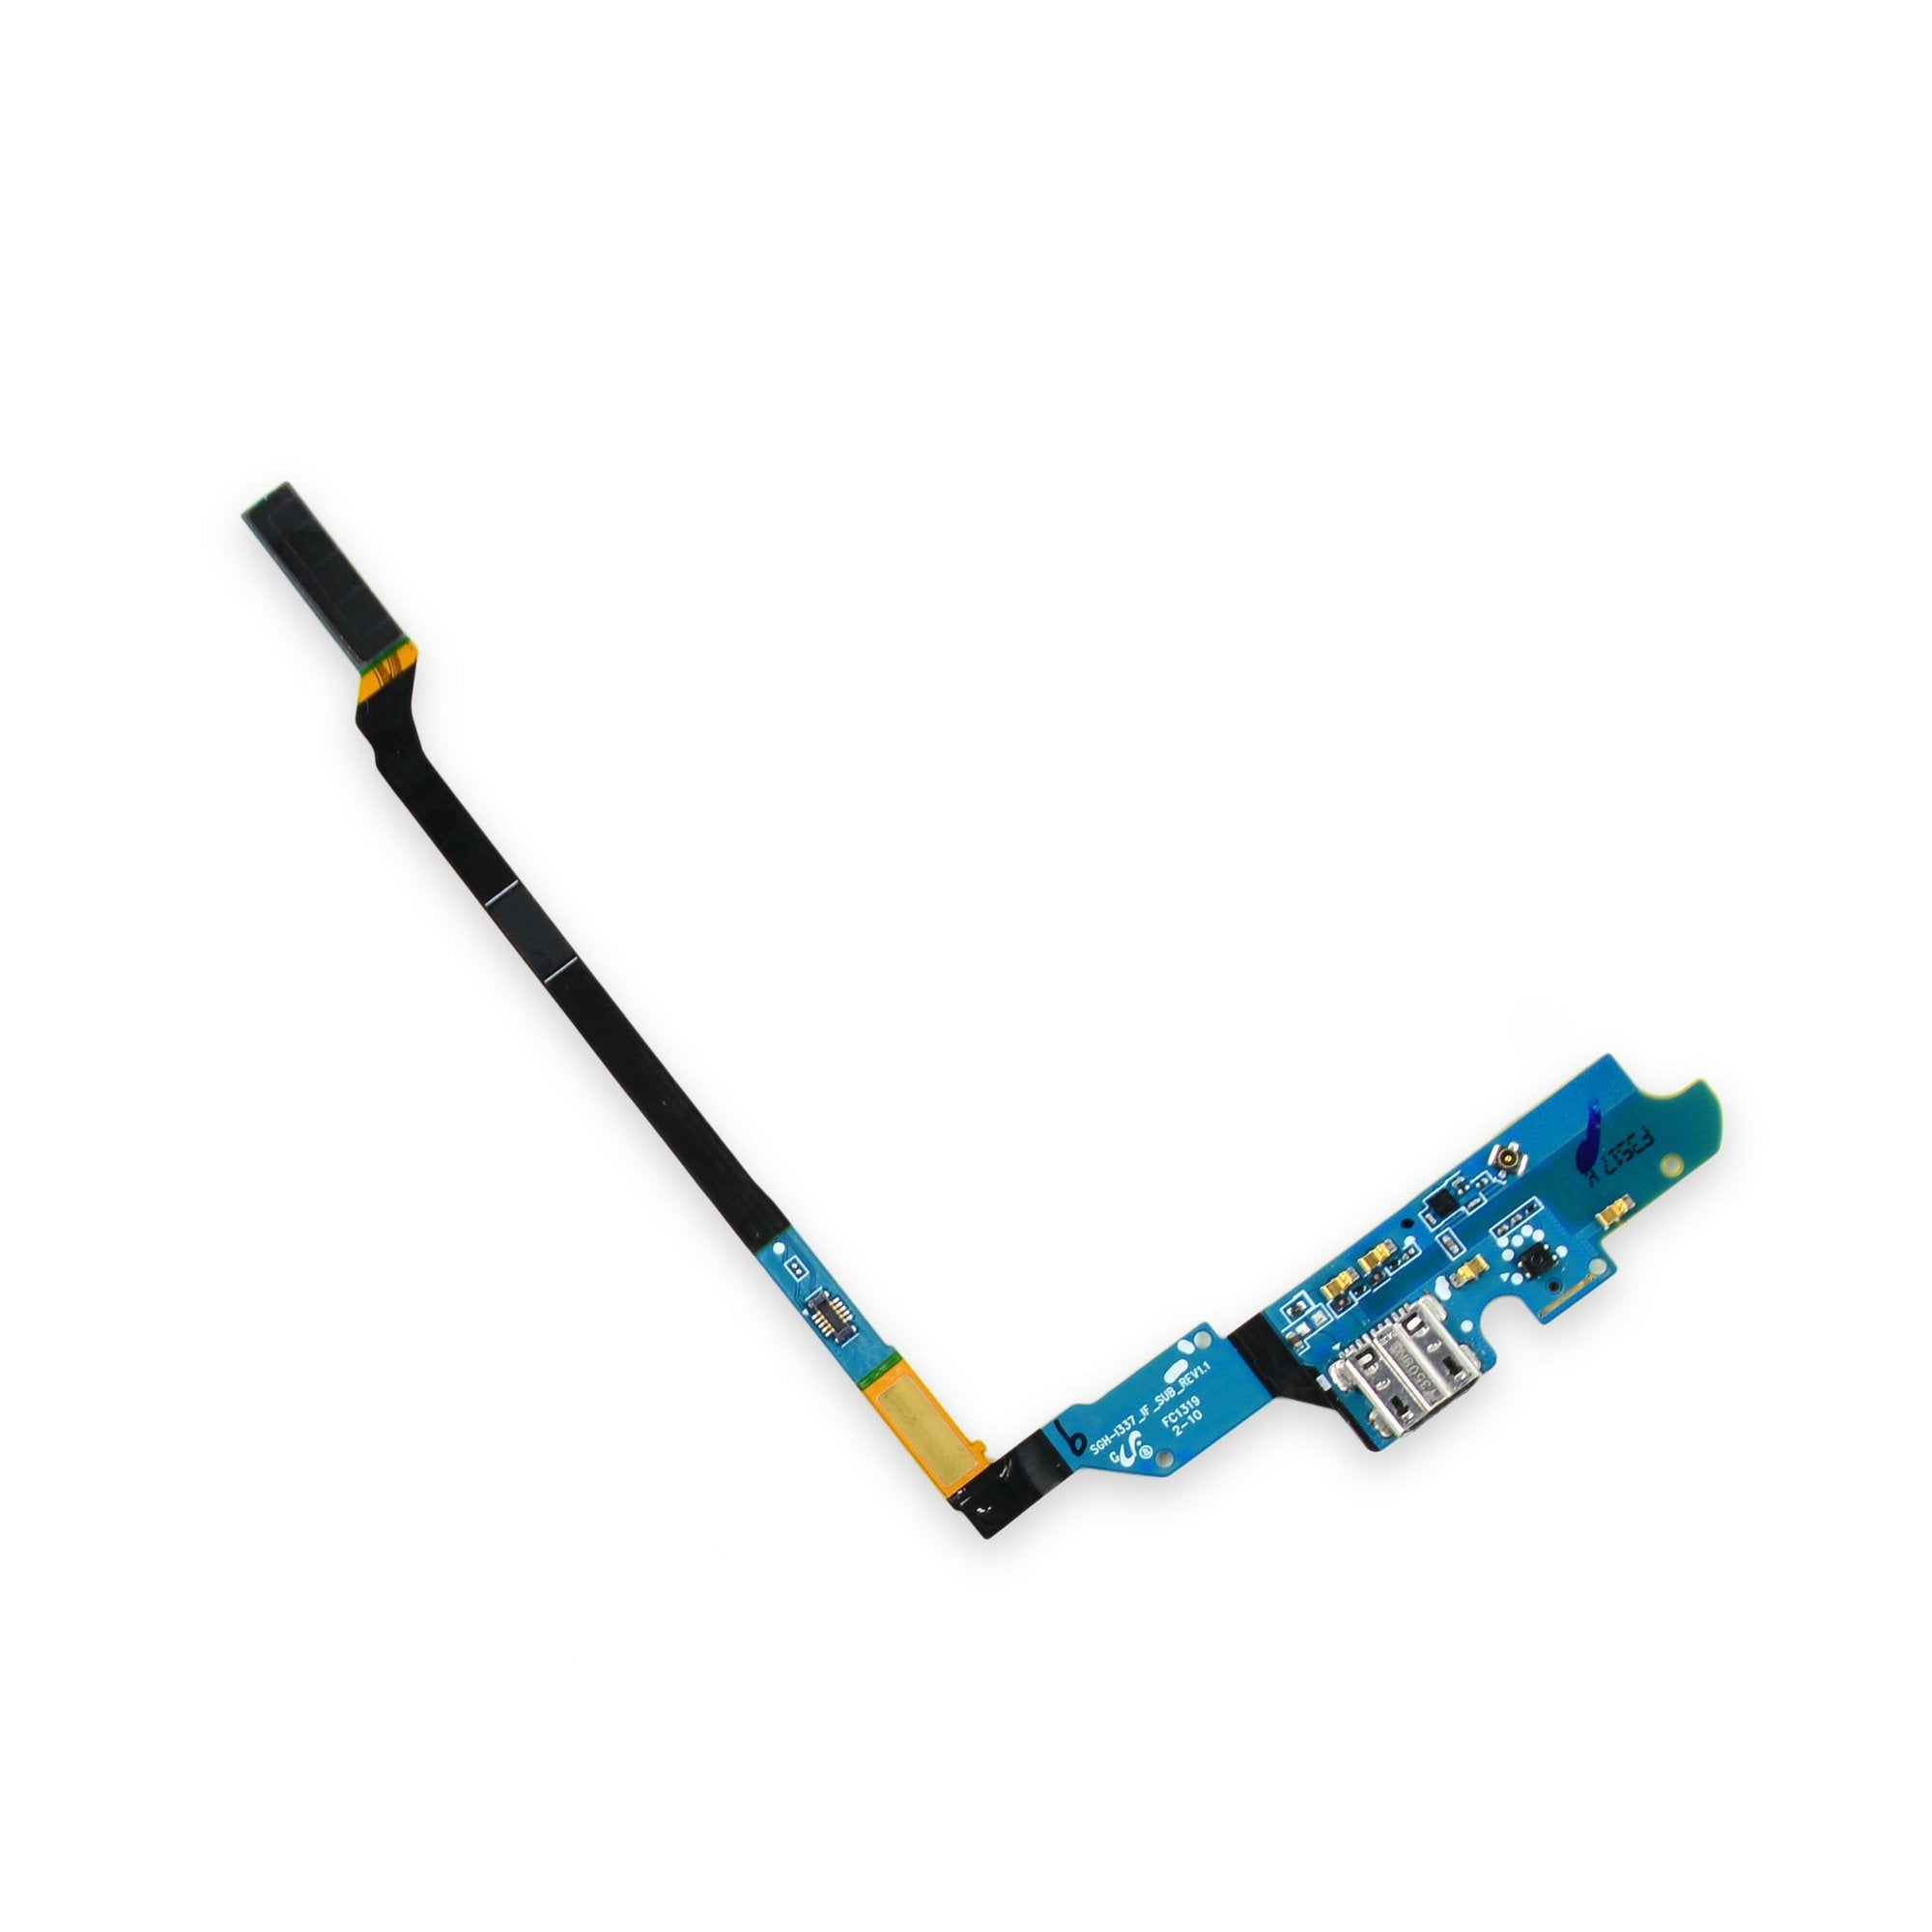 Galaxy S4 (AT&T / T-Mobile) Charging Assembly